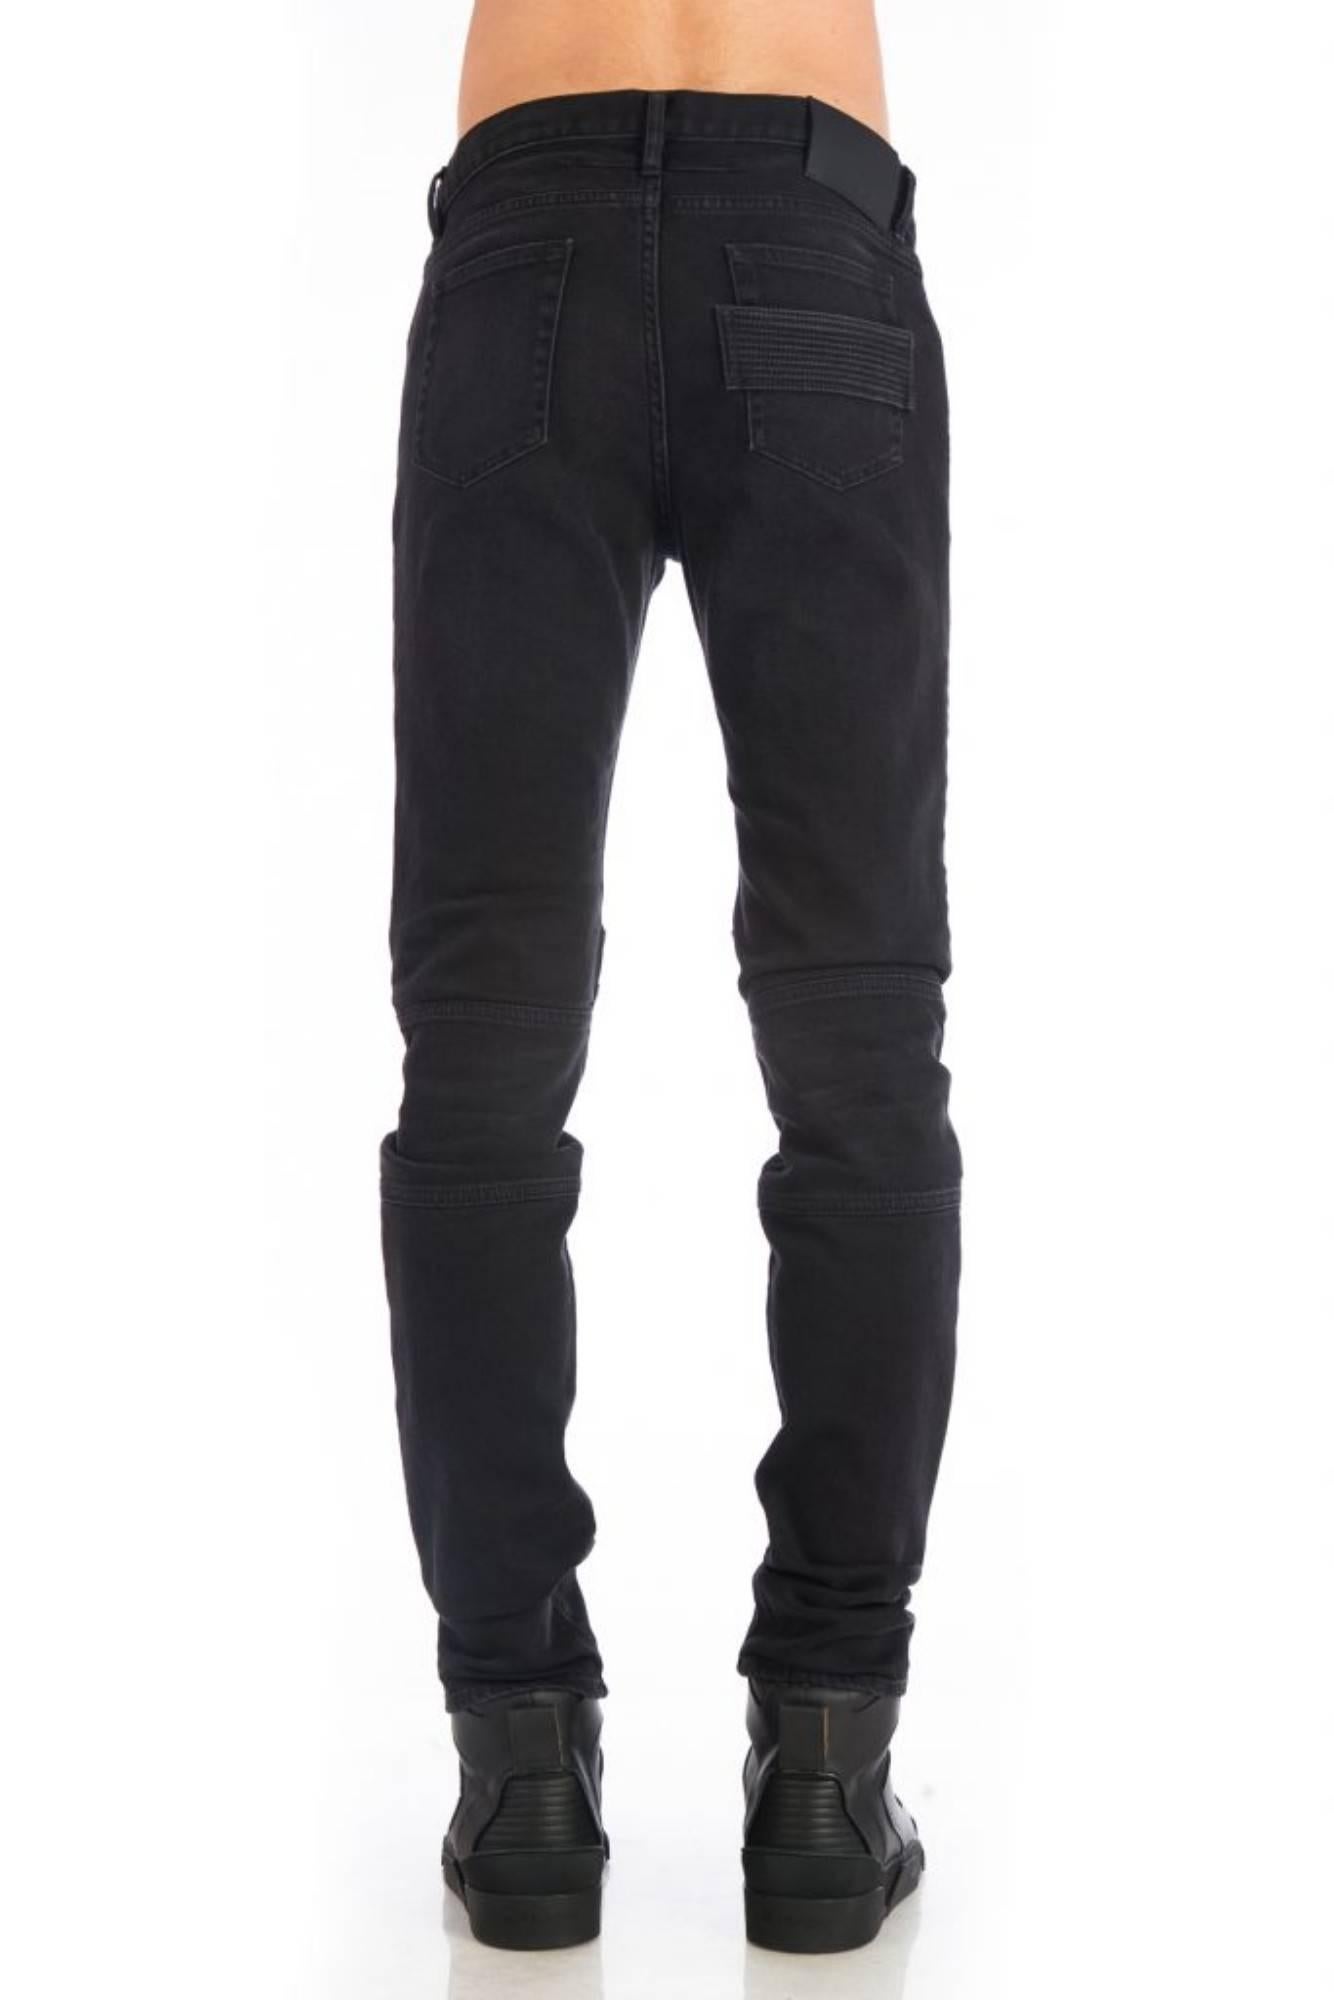 Black Givenchy Zip Detail Jeans (Size - 34) For Sale